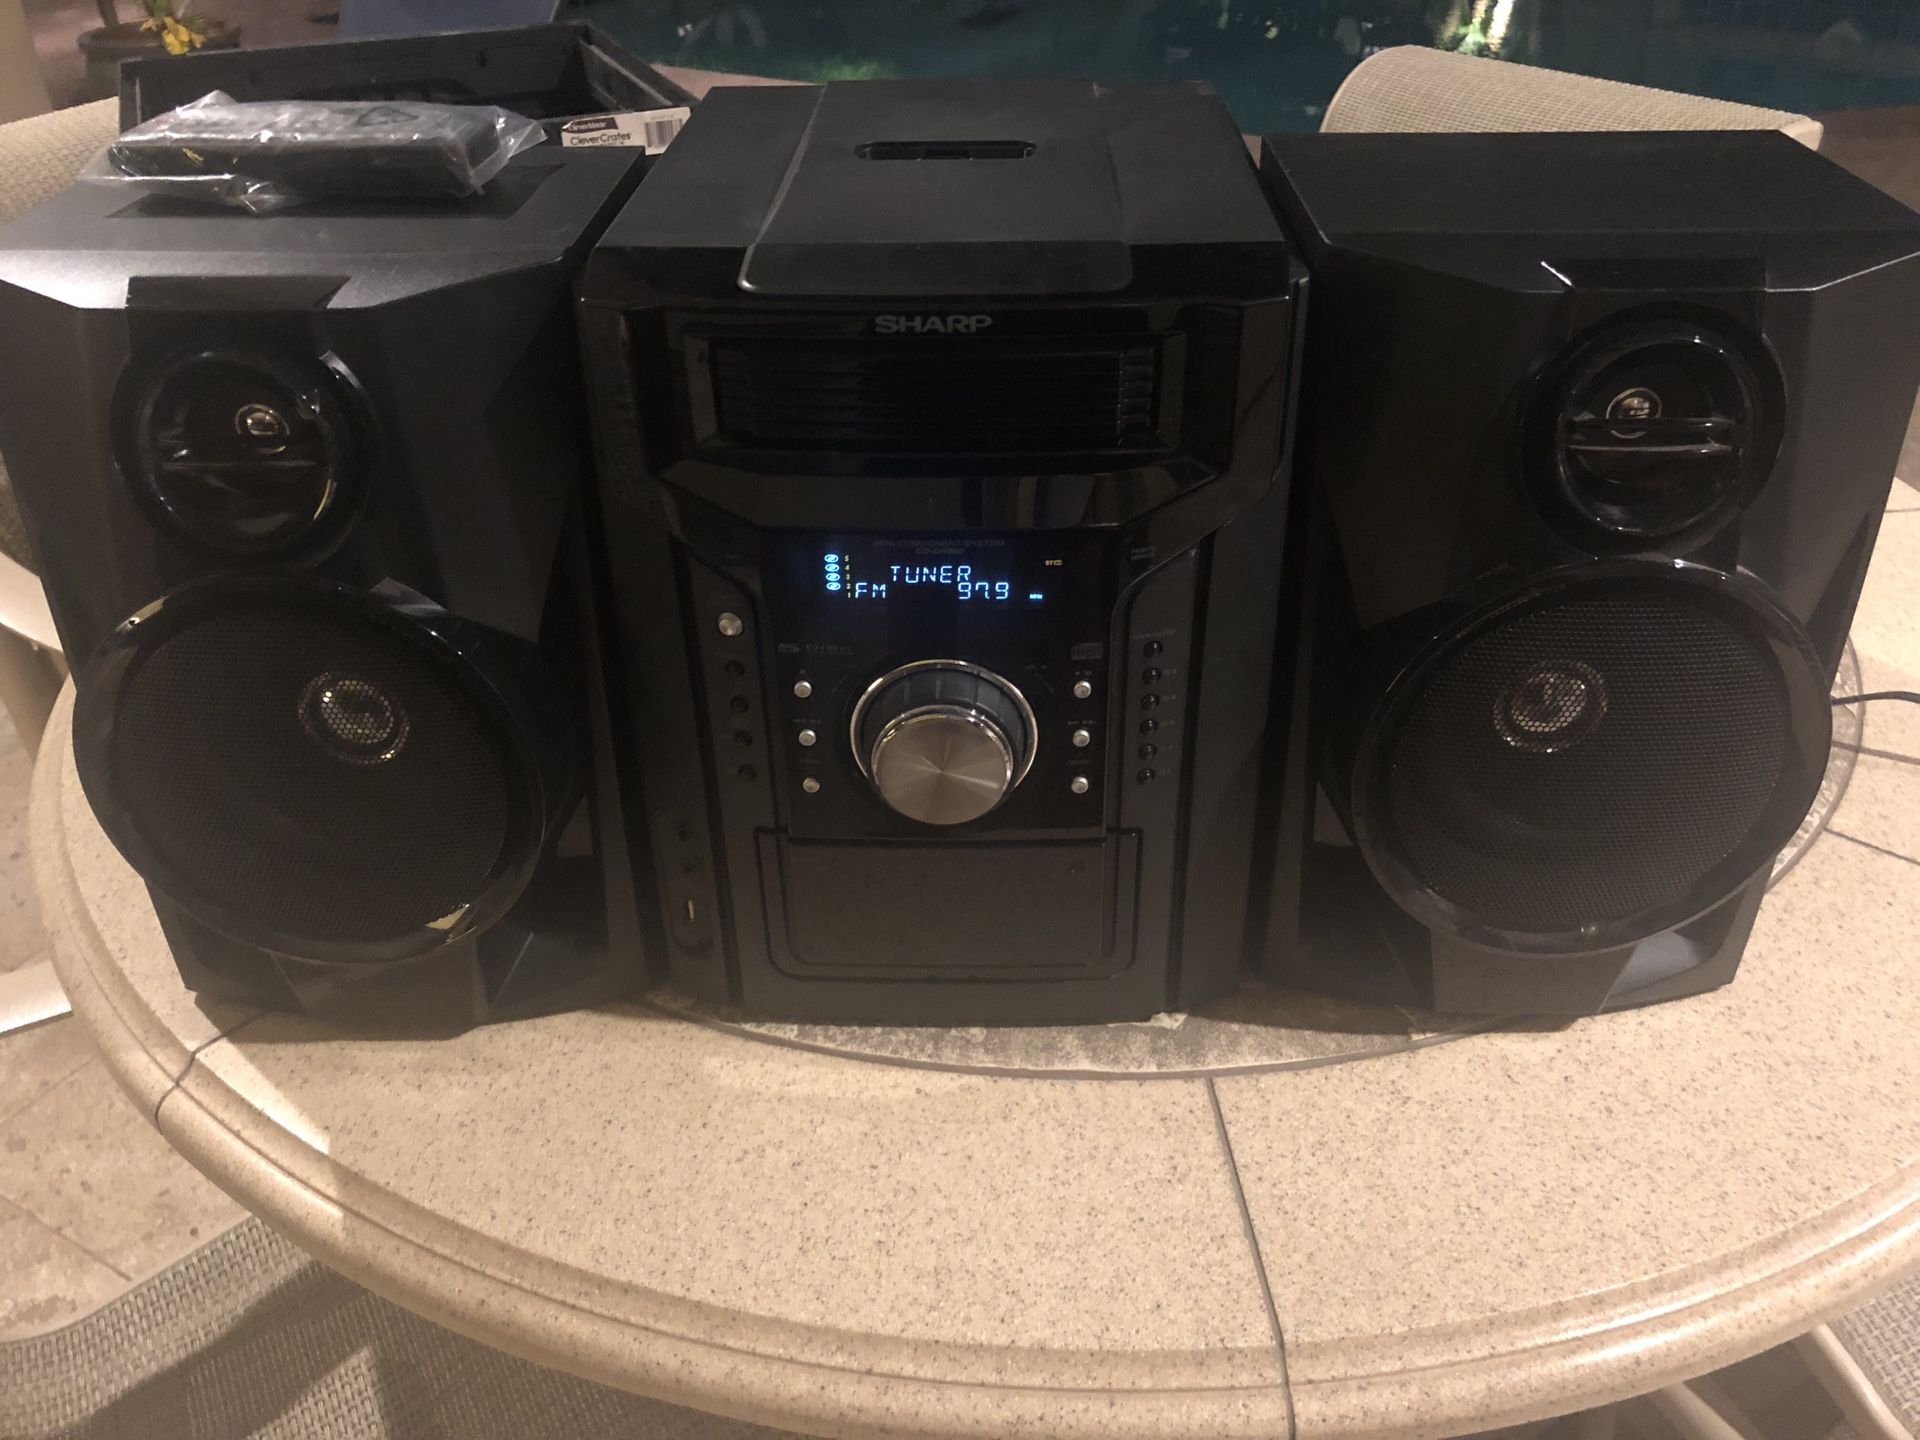 Stereo System - Sharp - Remote Control - 5 Disc CD Player - Cassette (Tape) Player - I-Phone Adapter On Top - Like Brand New - With Paperwork